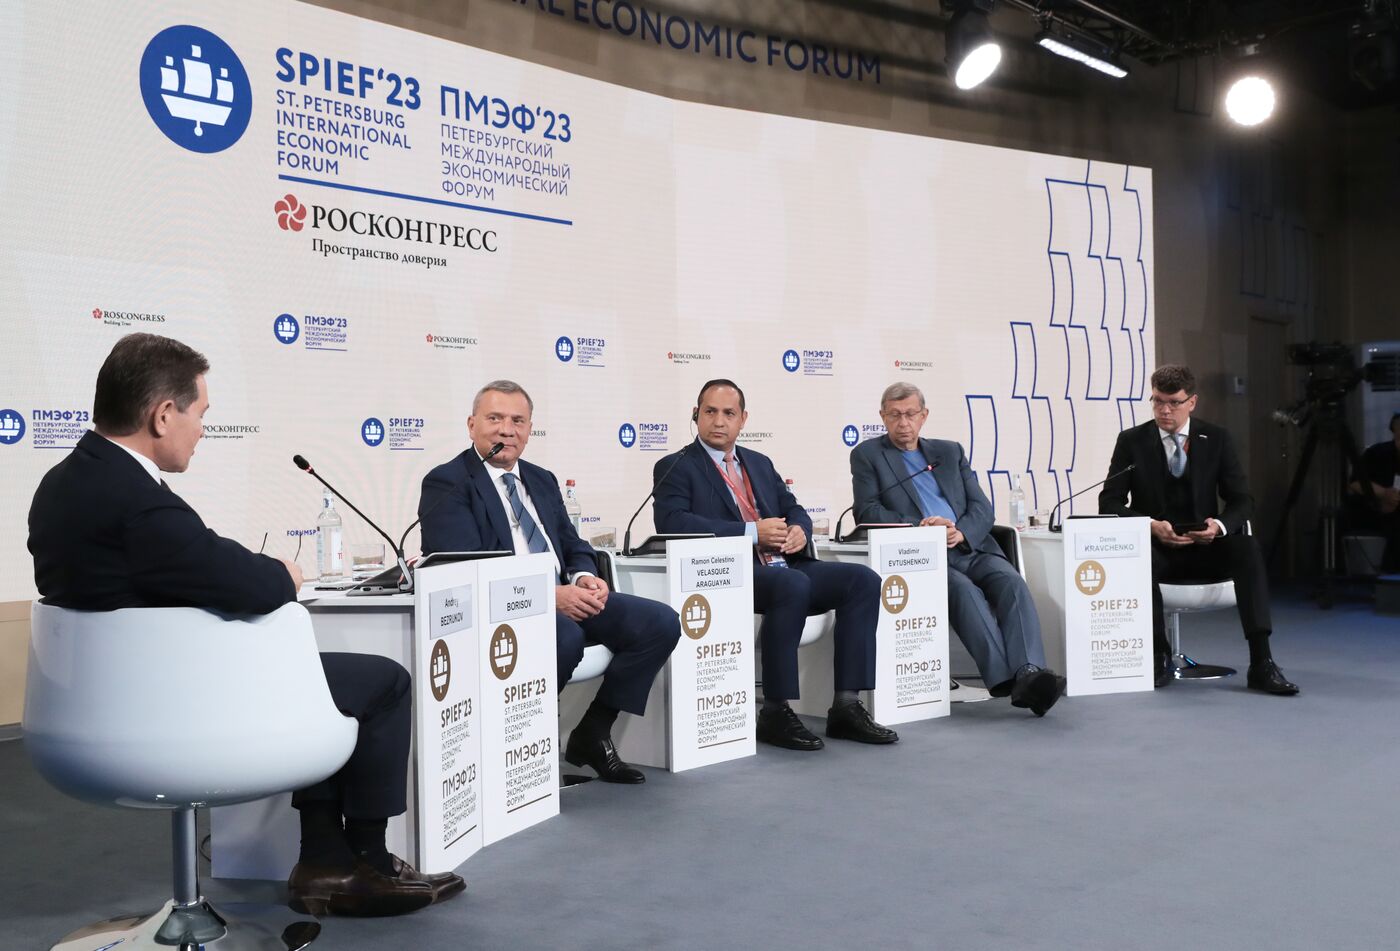 SPIEF-2023. Cooperation with BRICS Countries in Space: From Partnership to Technological Alliance